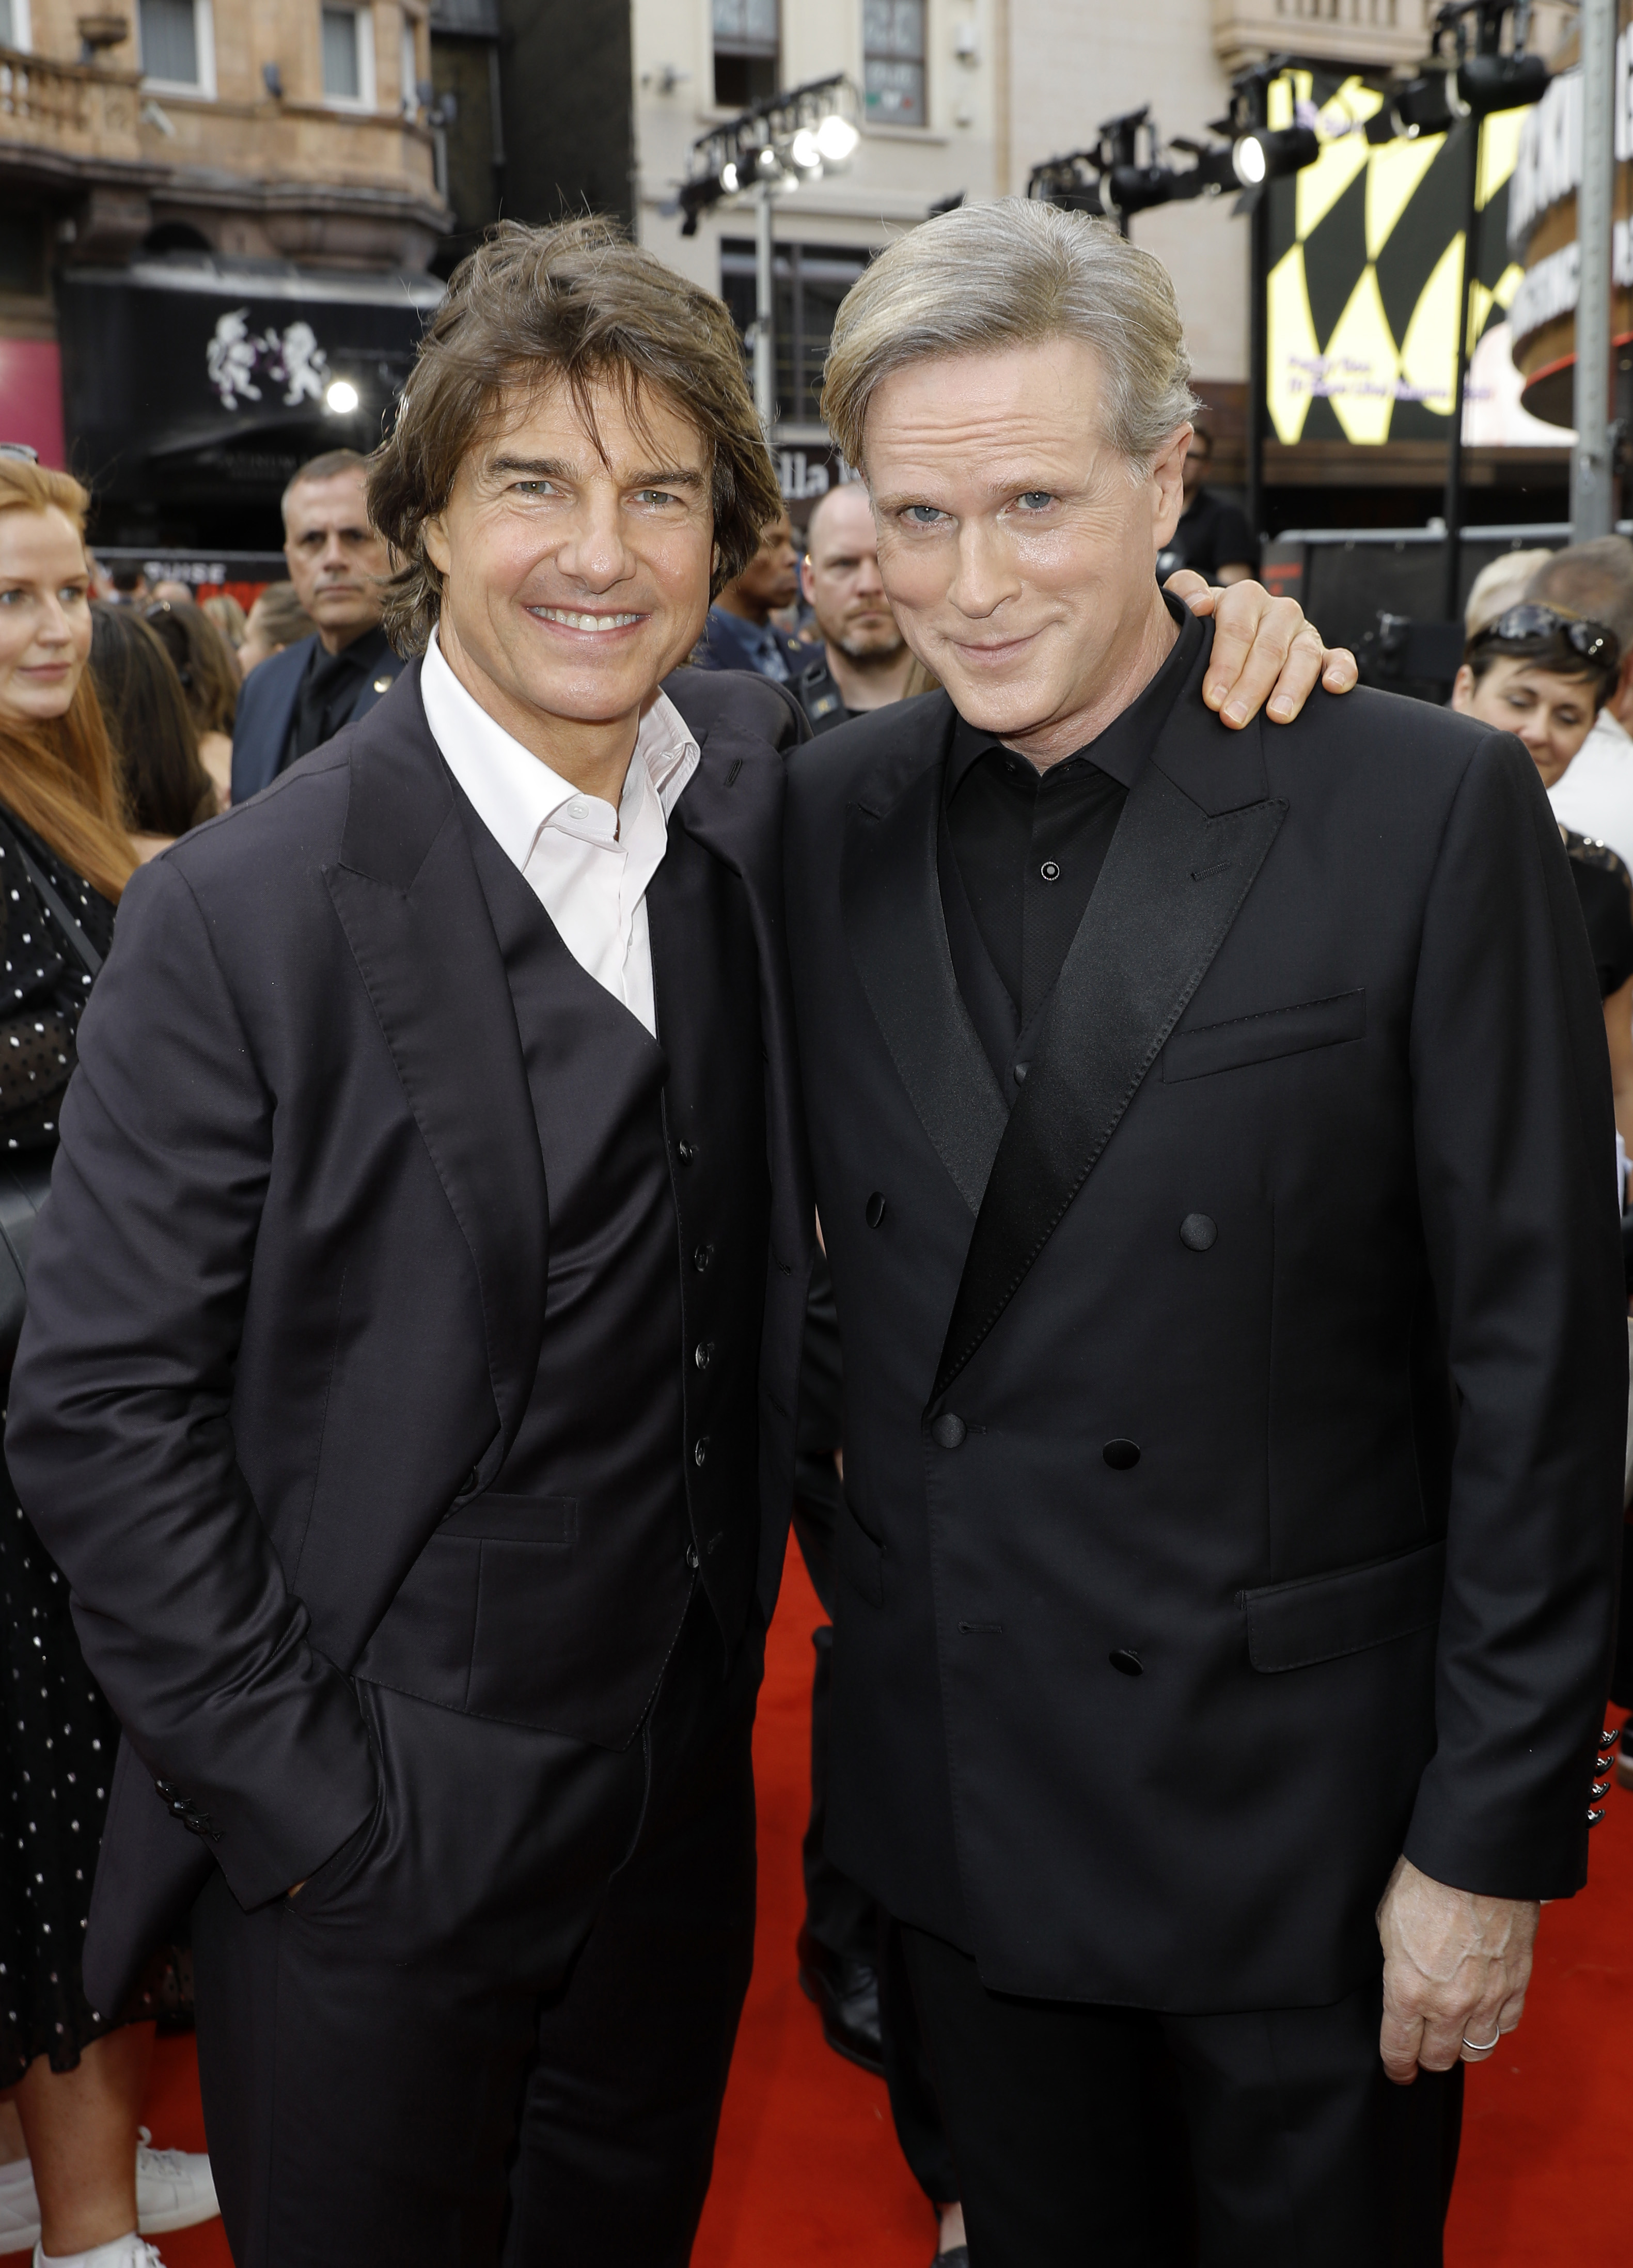 Tom Cruise and Cary Elwes at the UK premiere of "Mission: Impossible - Dead Reckoning Part One" on June 22, 2023, in London, England | Source: Getty Images